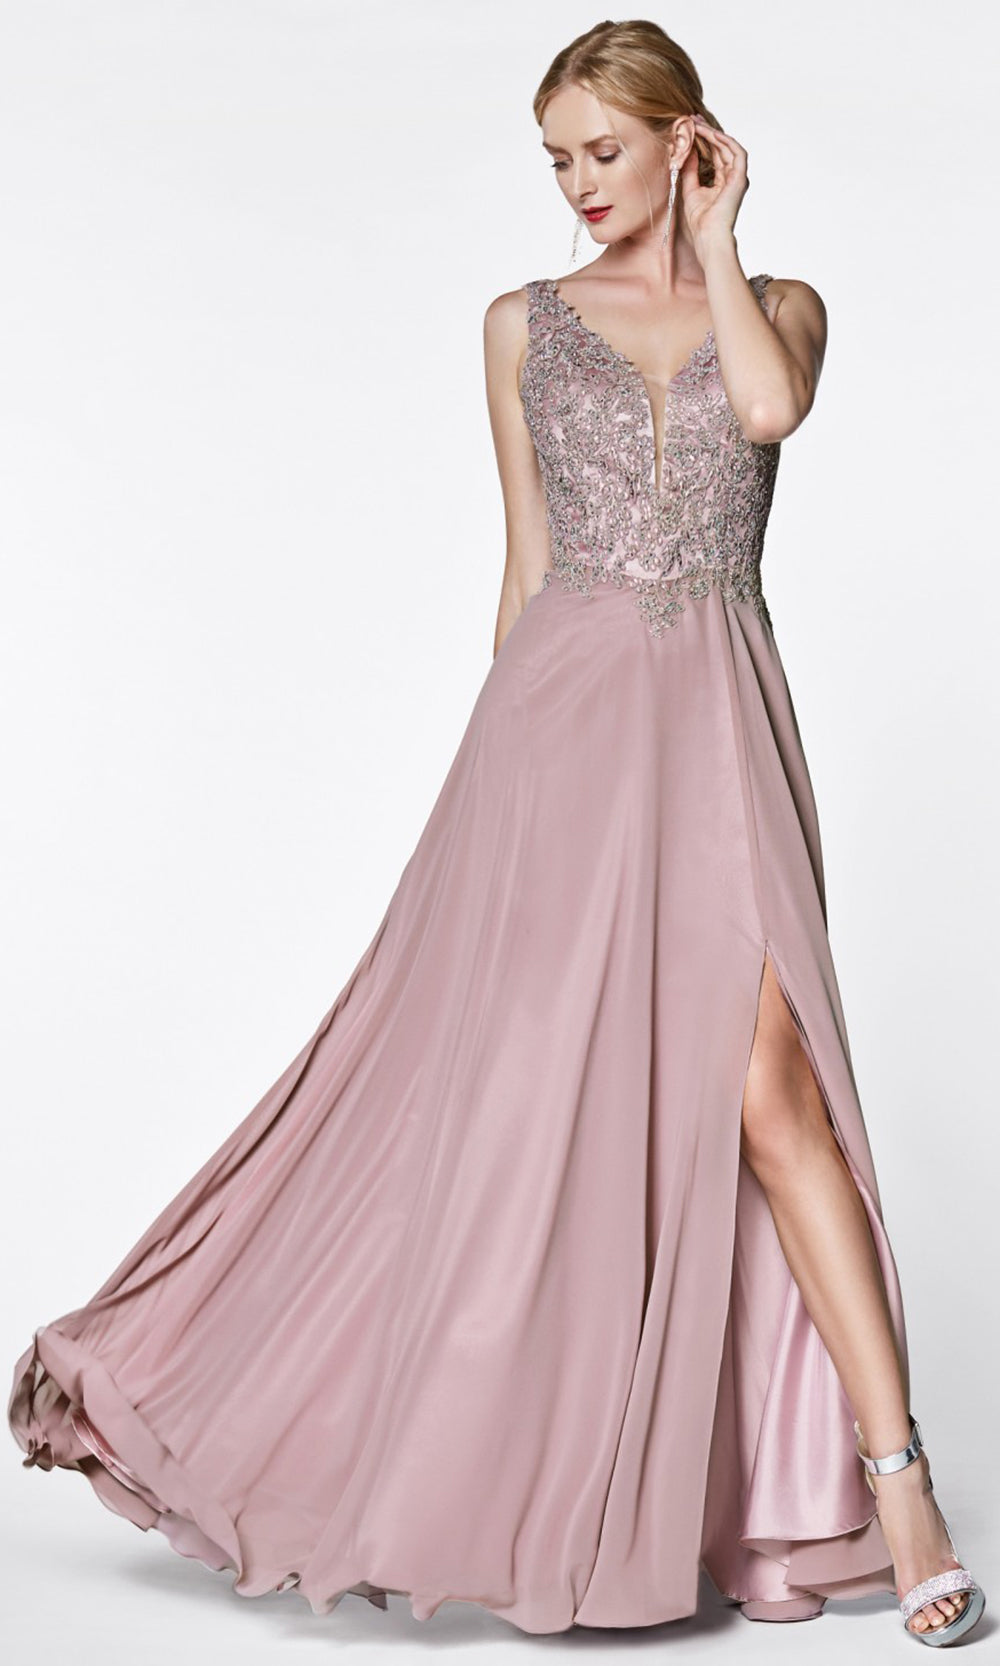 Cinderella Divine - CD0133 Adorned Chiffon Long Gown In Purple and Gray